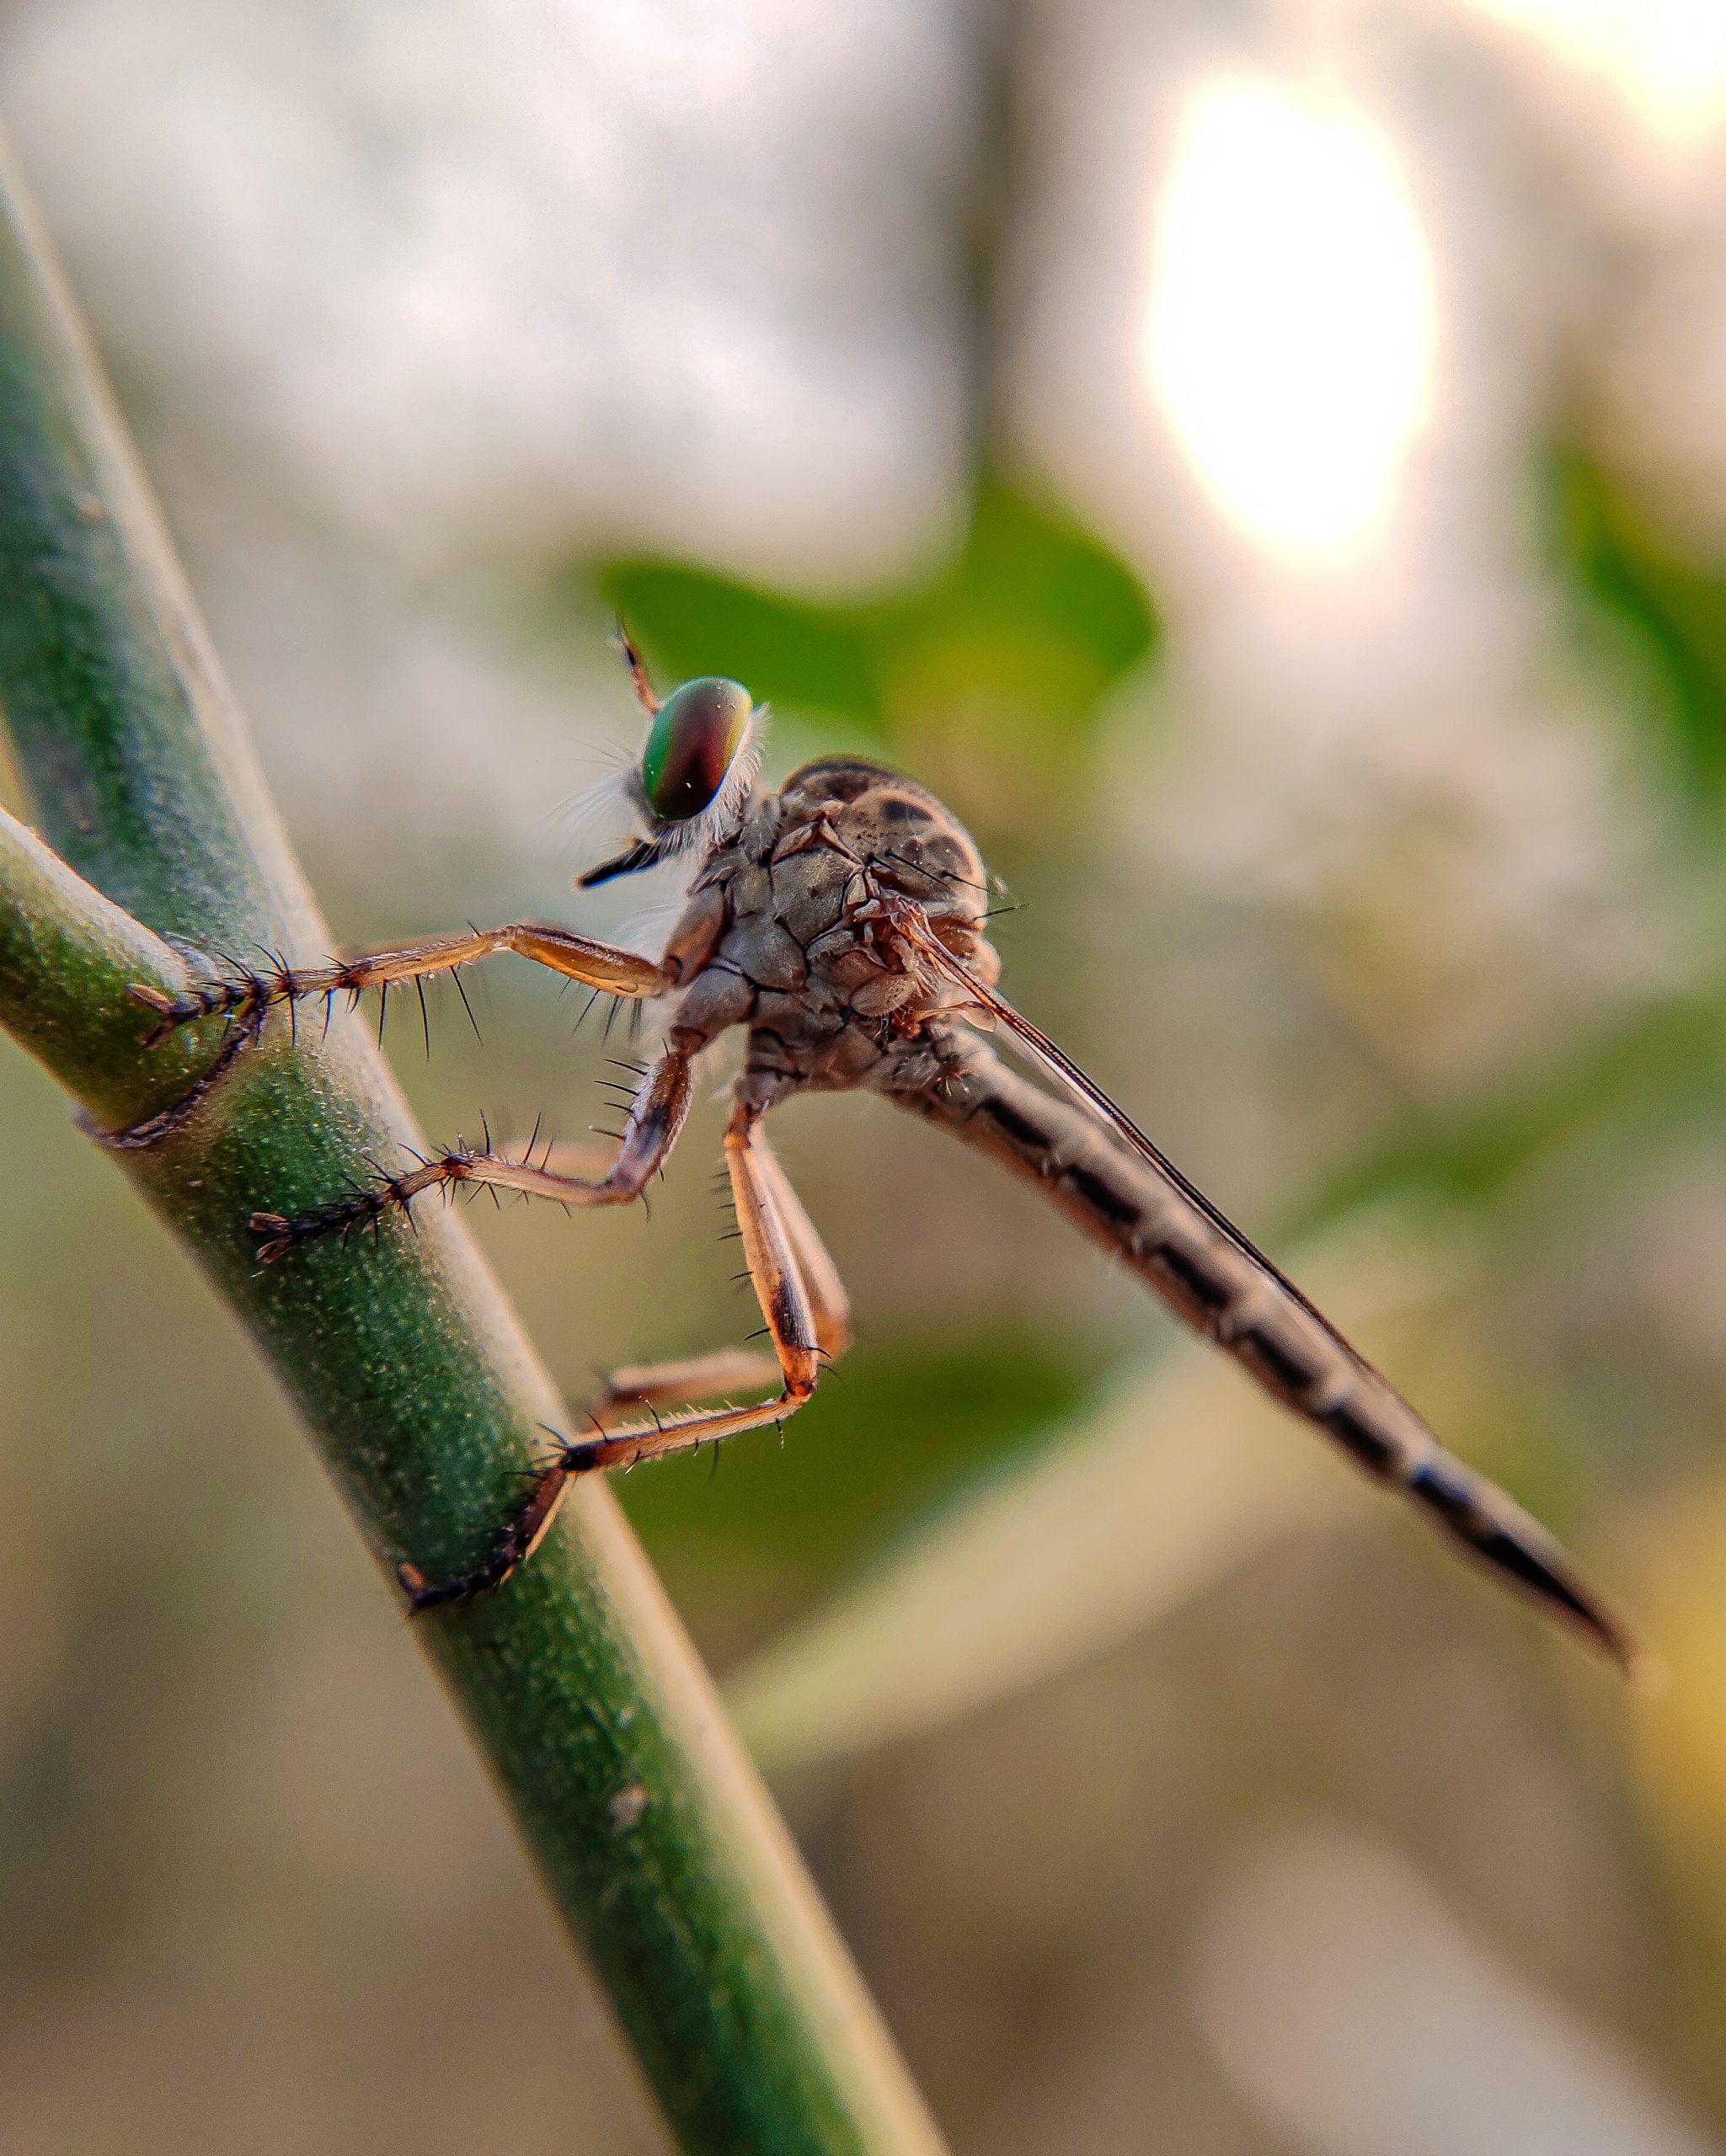 A robber fly on a plant stem